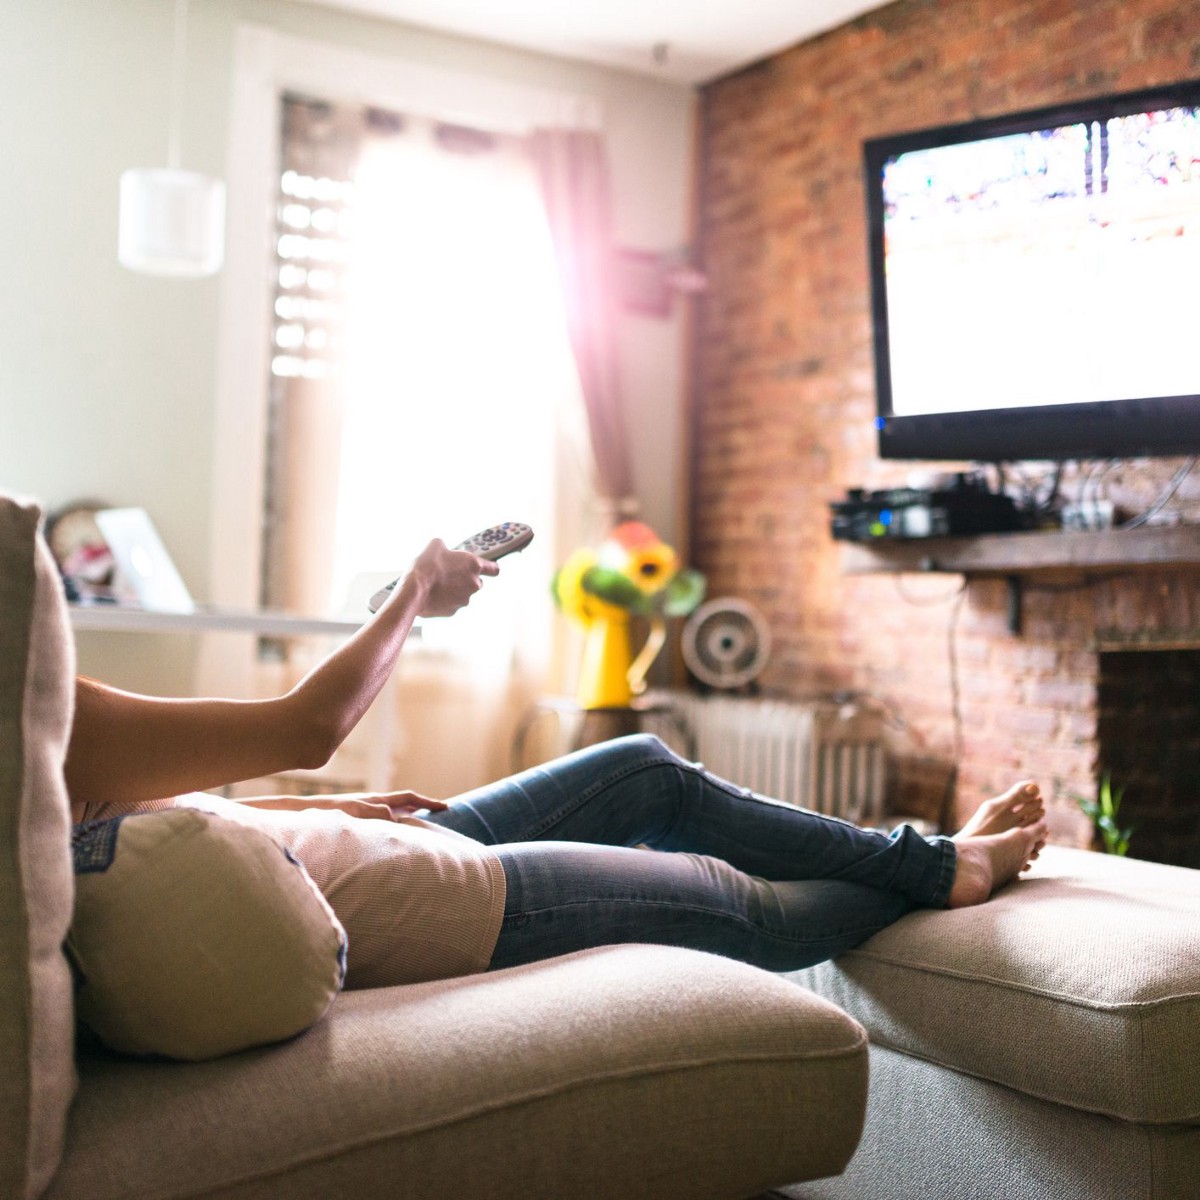 Girl sitting in front of a TV with remote